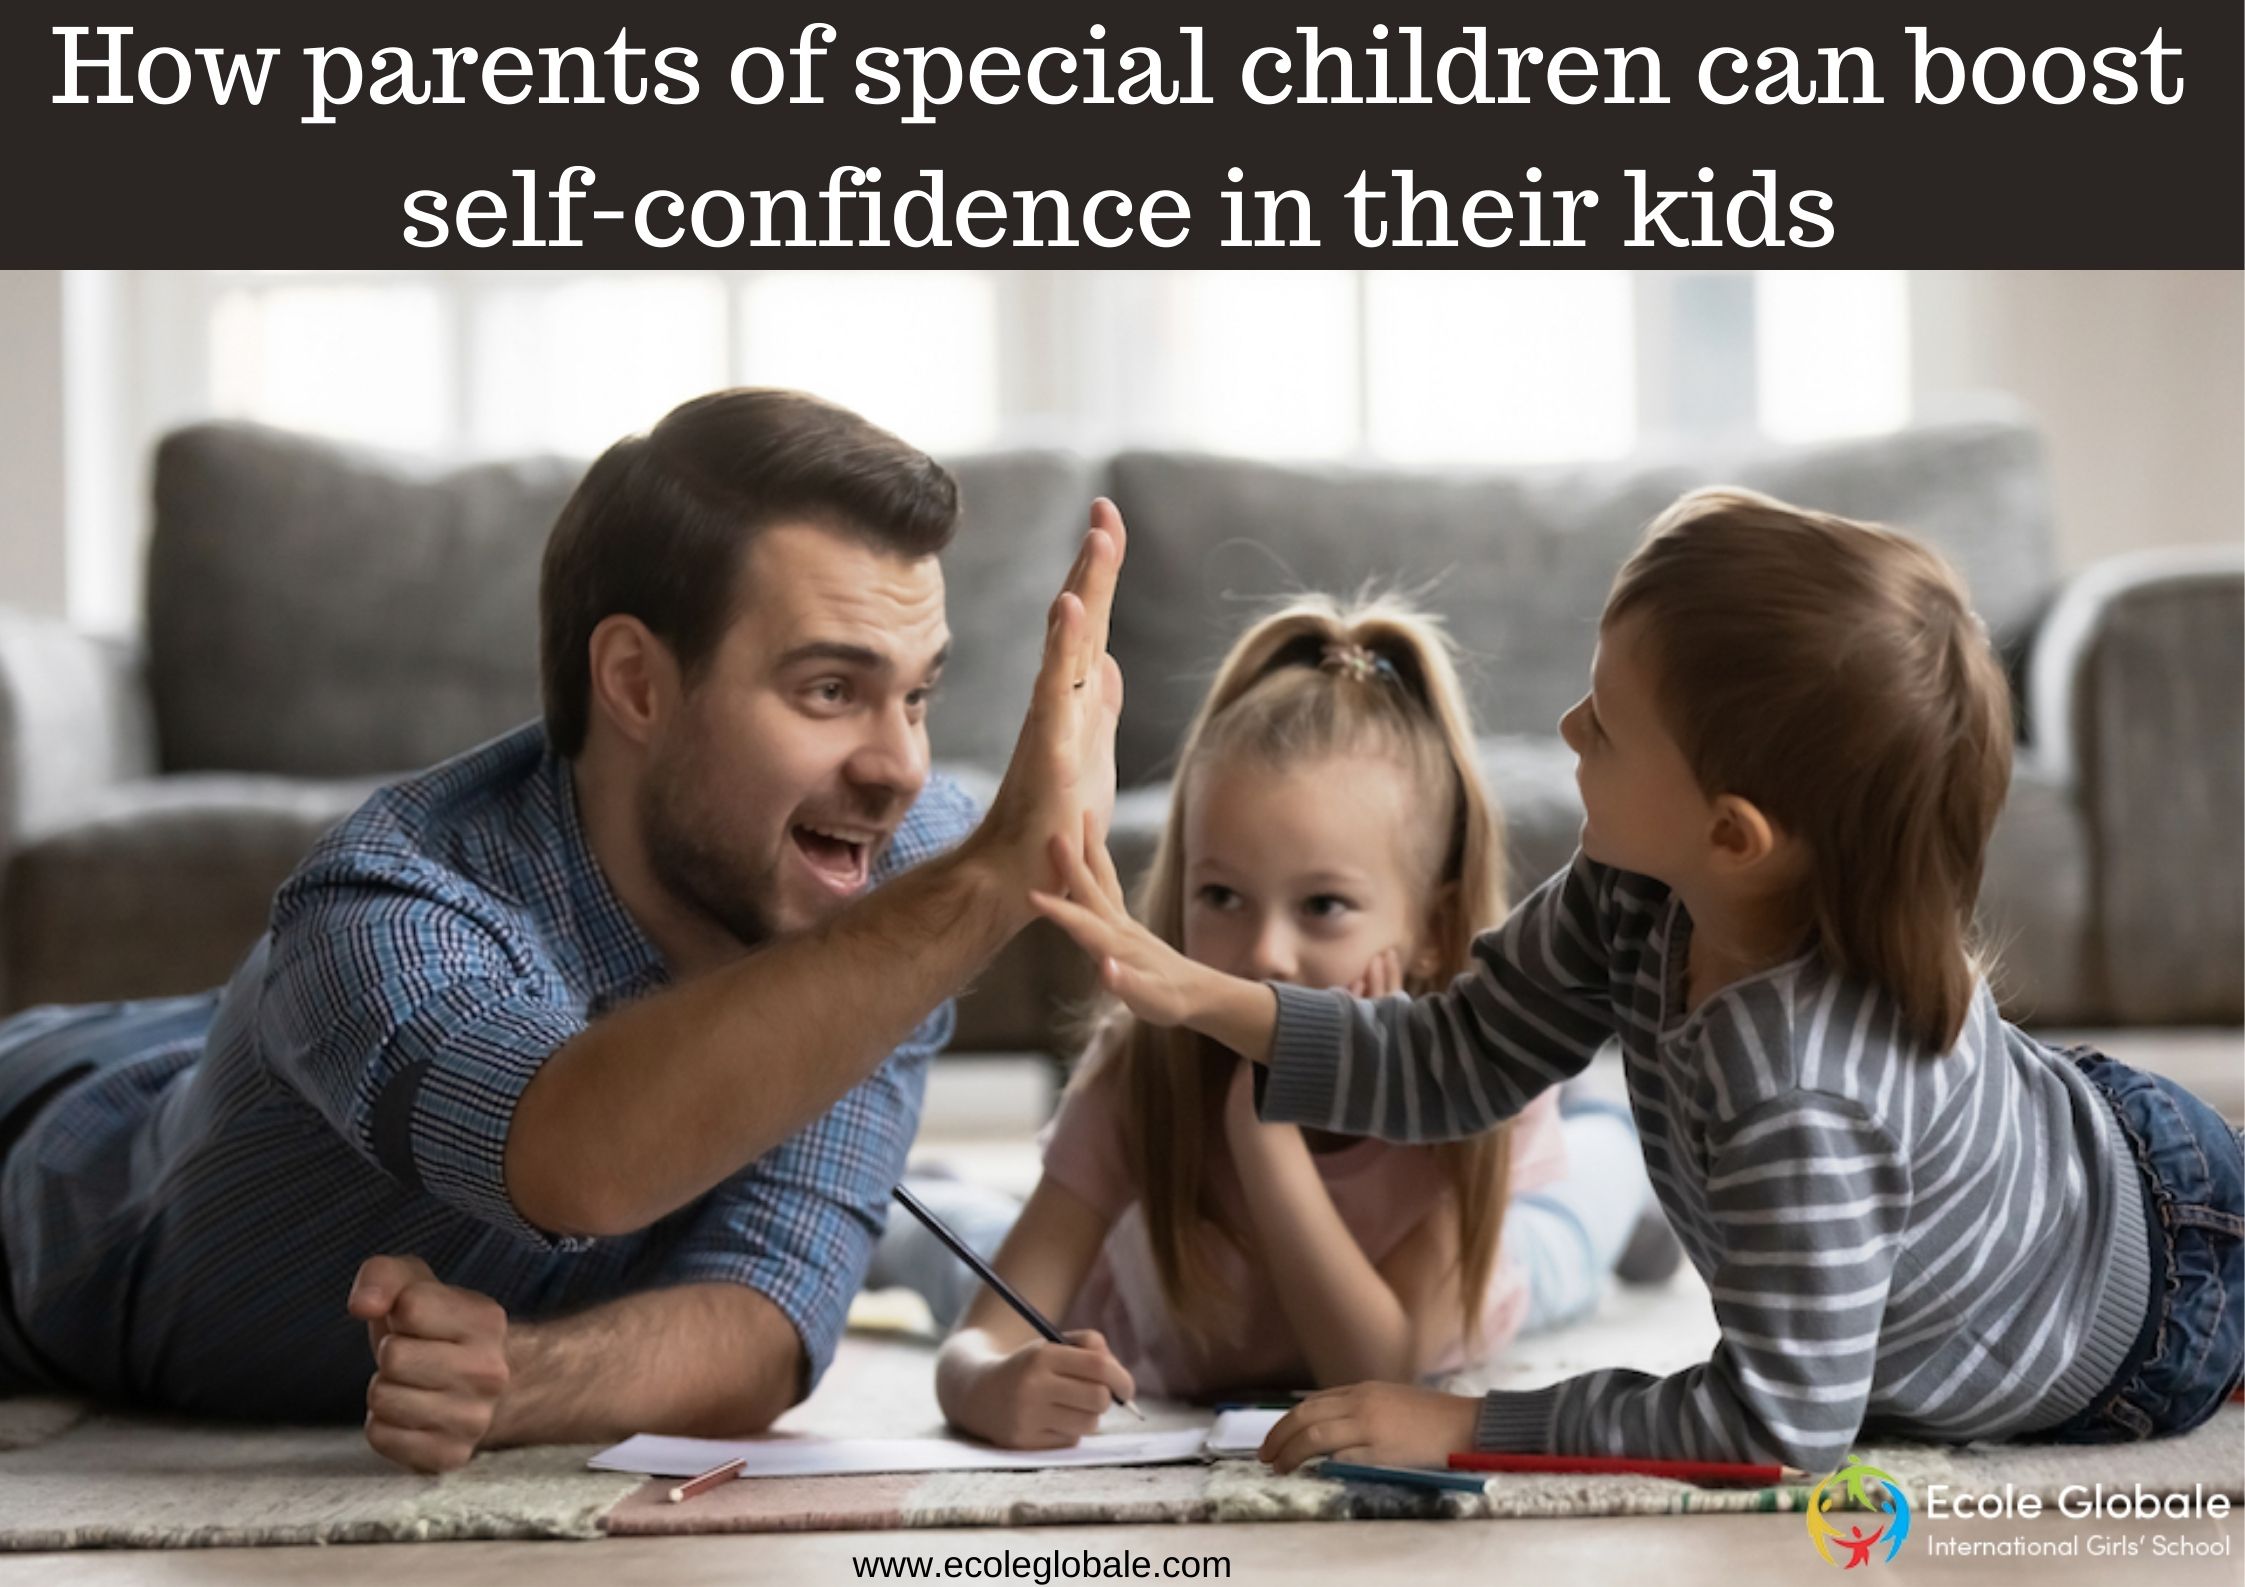 How parents of special children can boost self-confidence in their kids